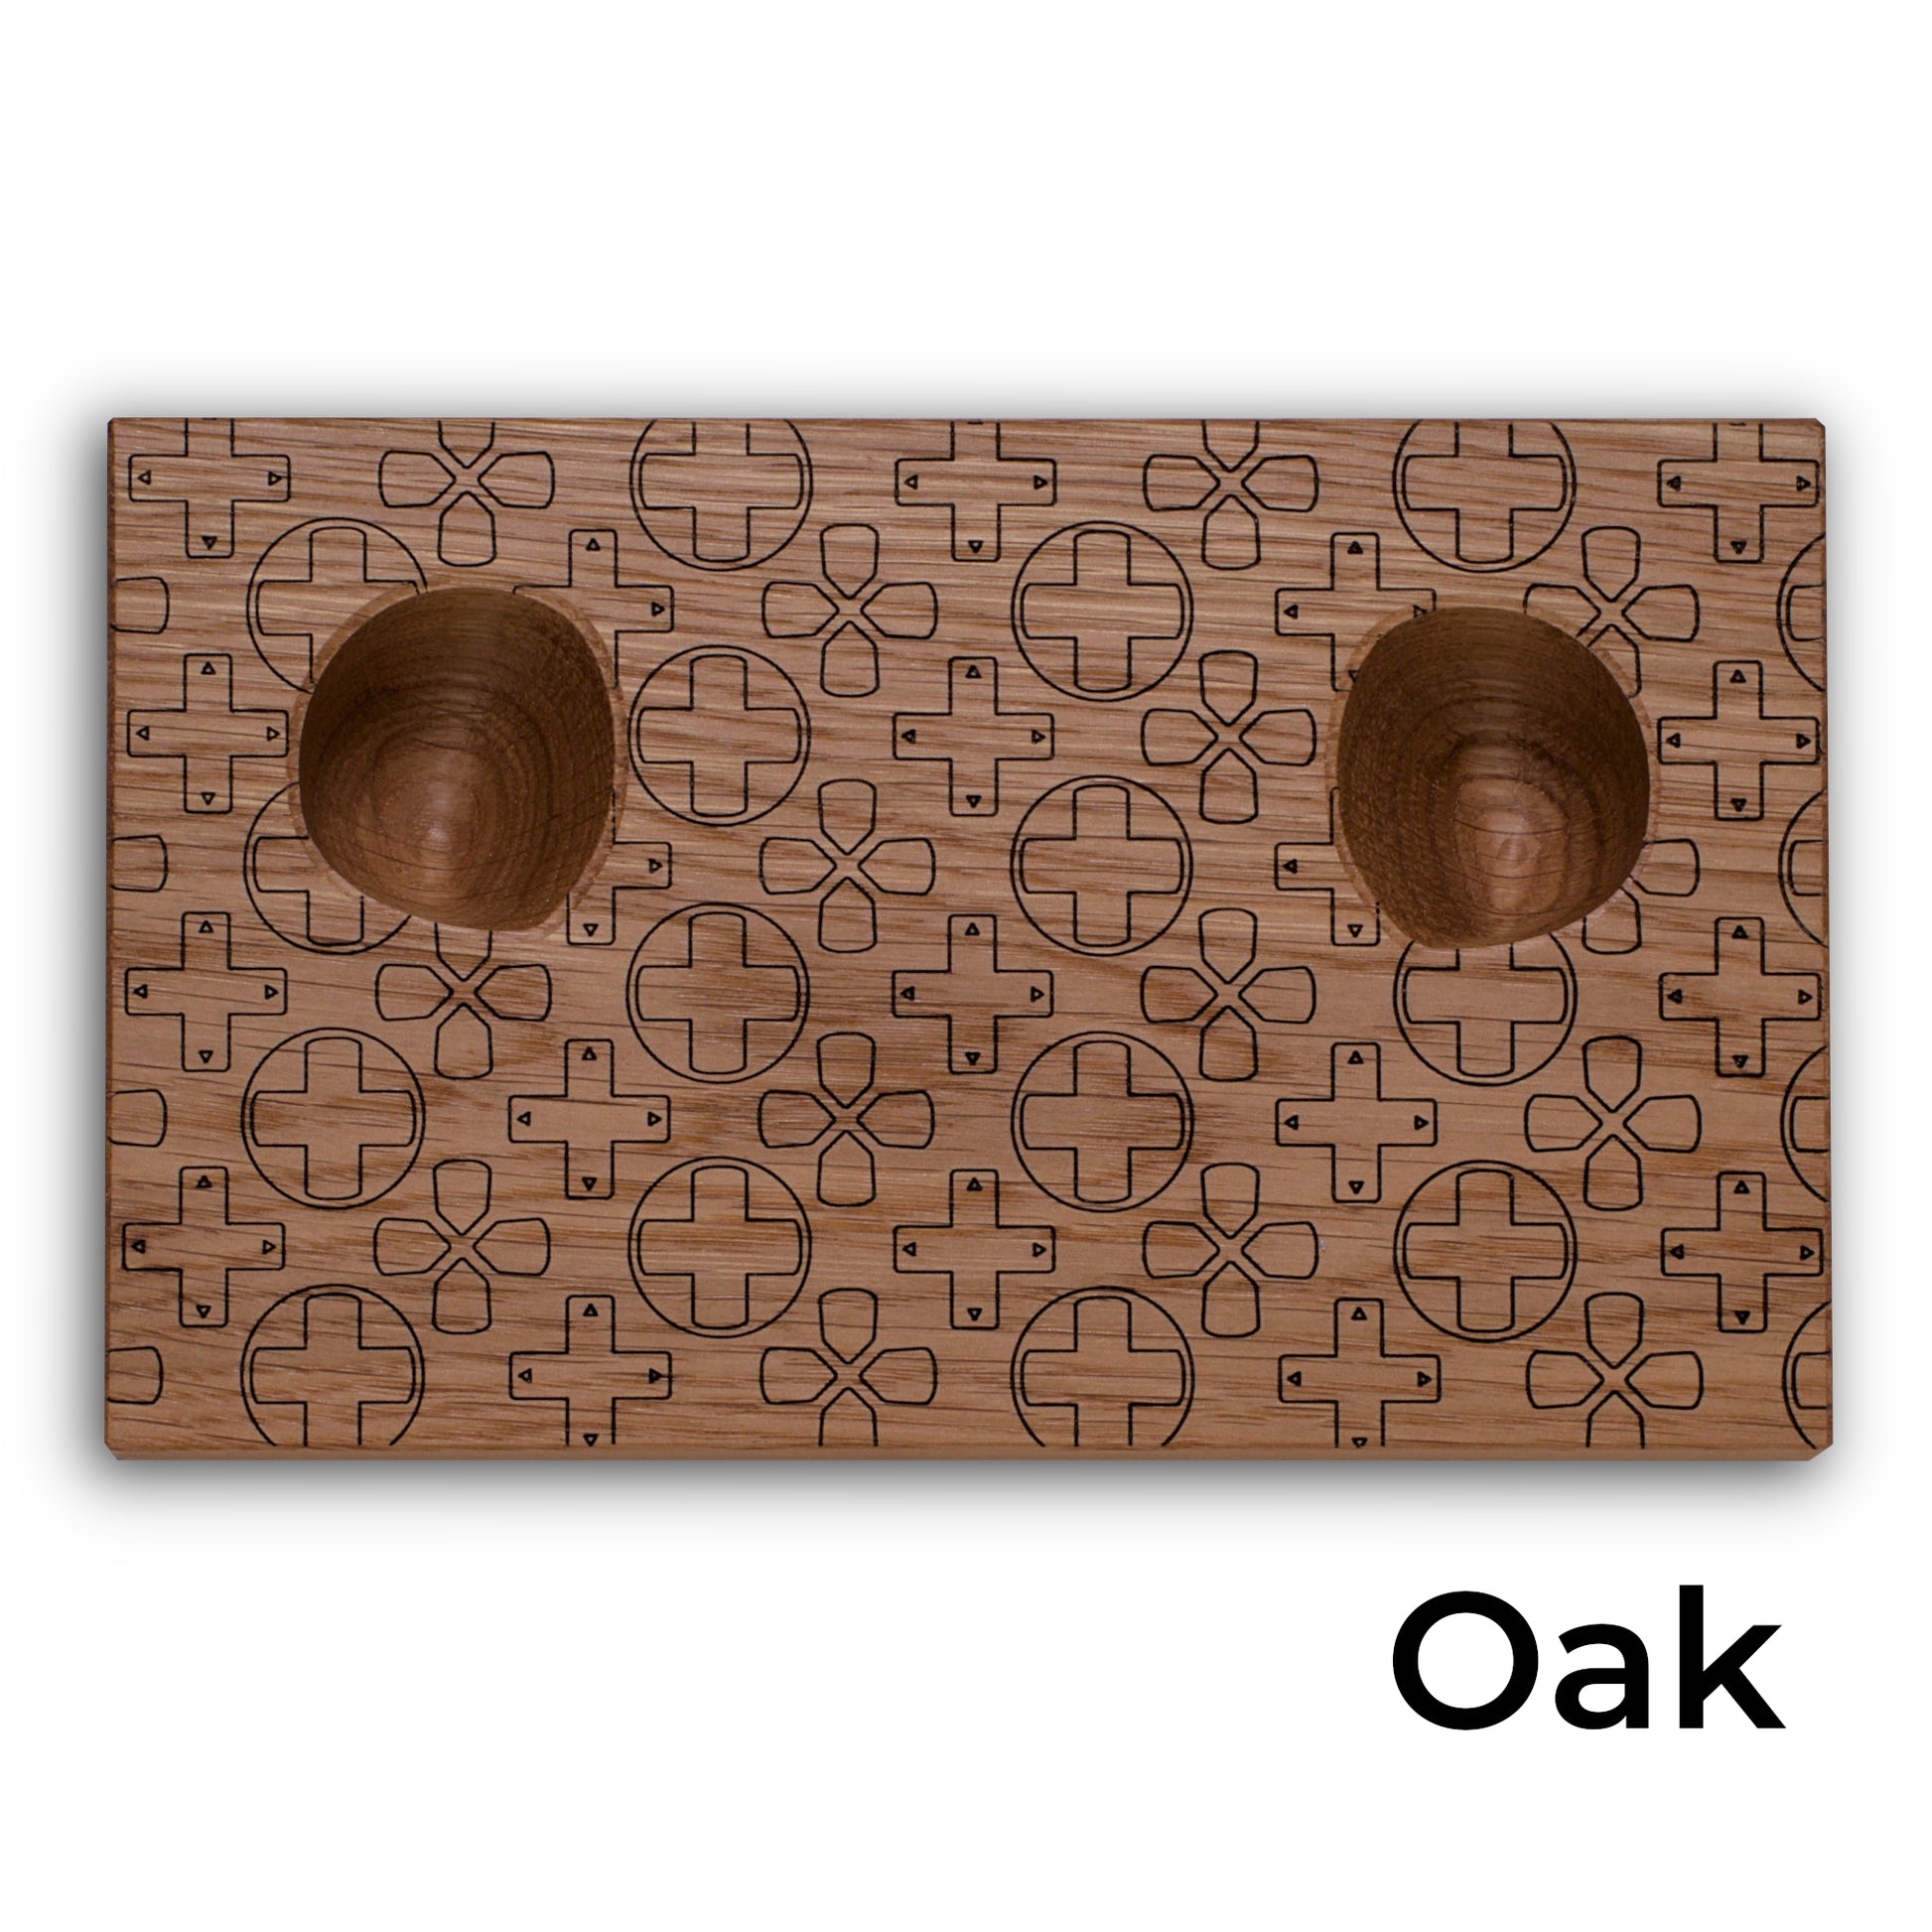 Wooden stand with d-pad design in oak for Playstation 4 dualshock controller